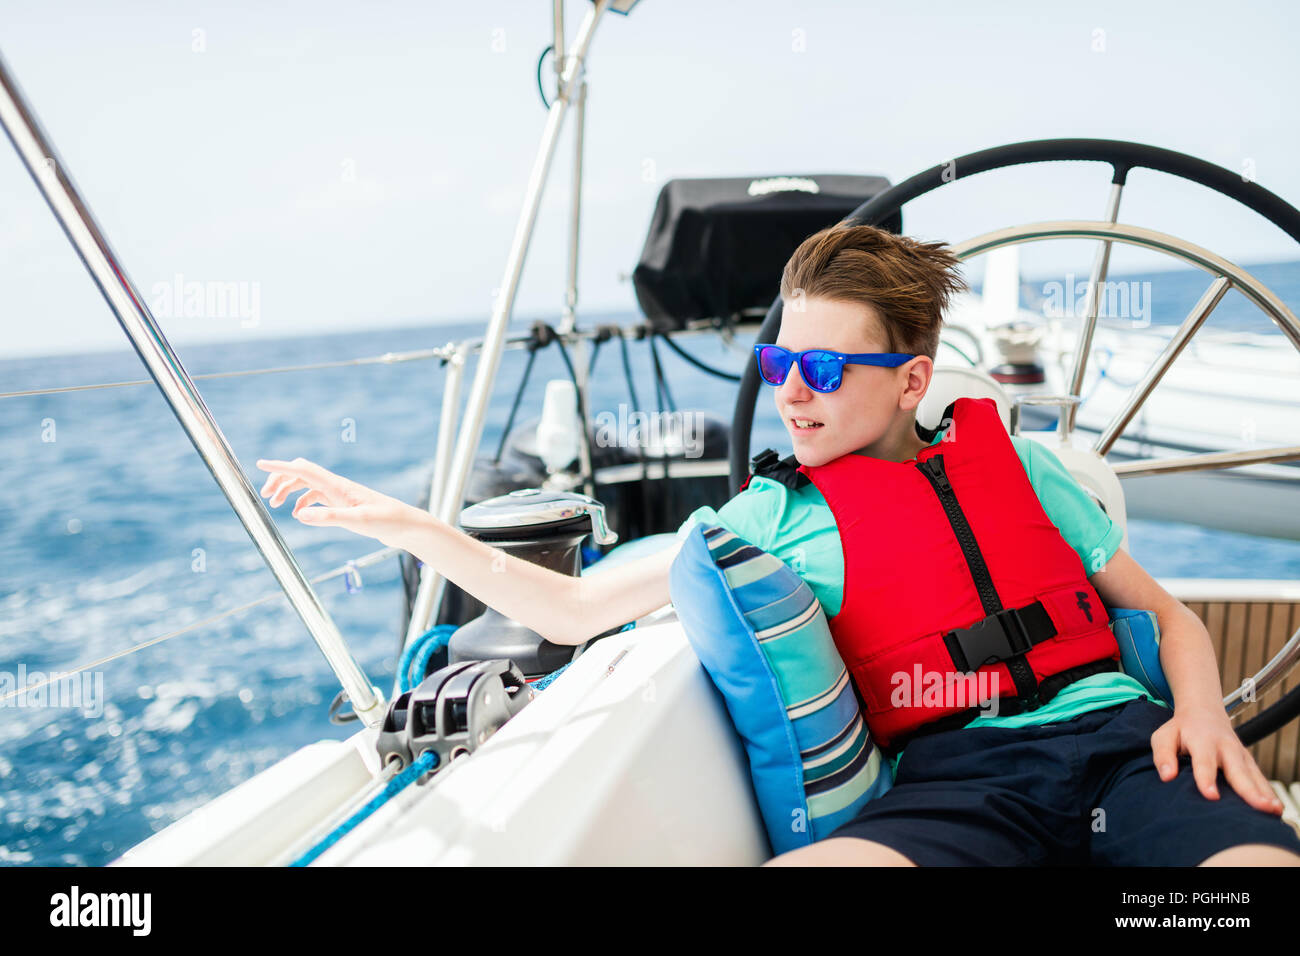 Yacht Life Jacket High Resolution Stock Photography And Images Alamy